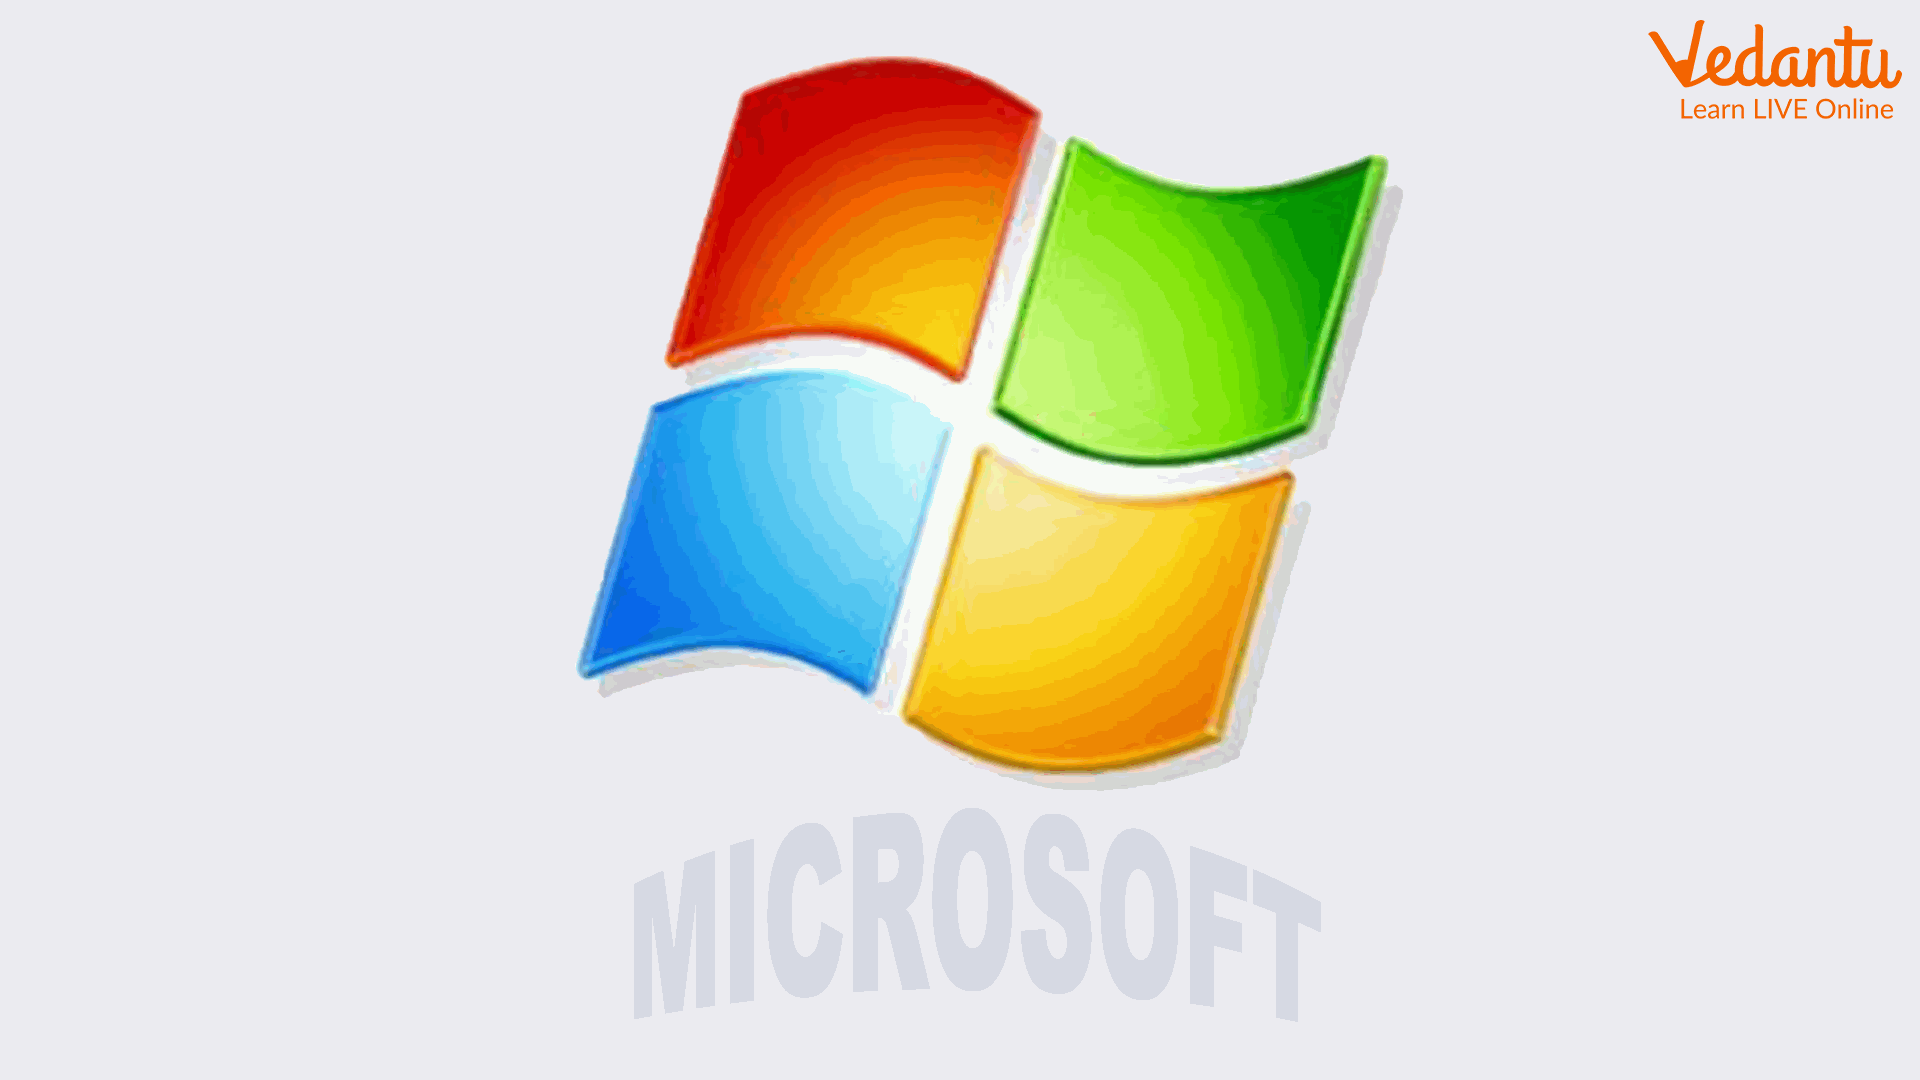 Types Of Windows Operating System